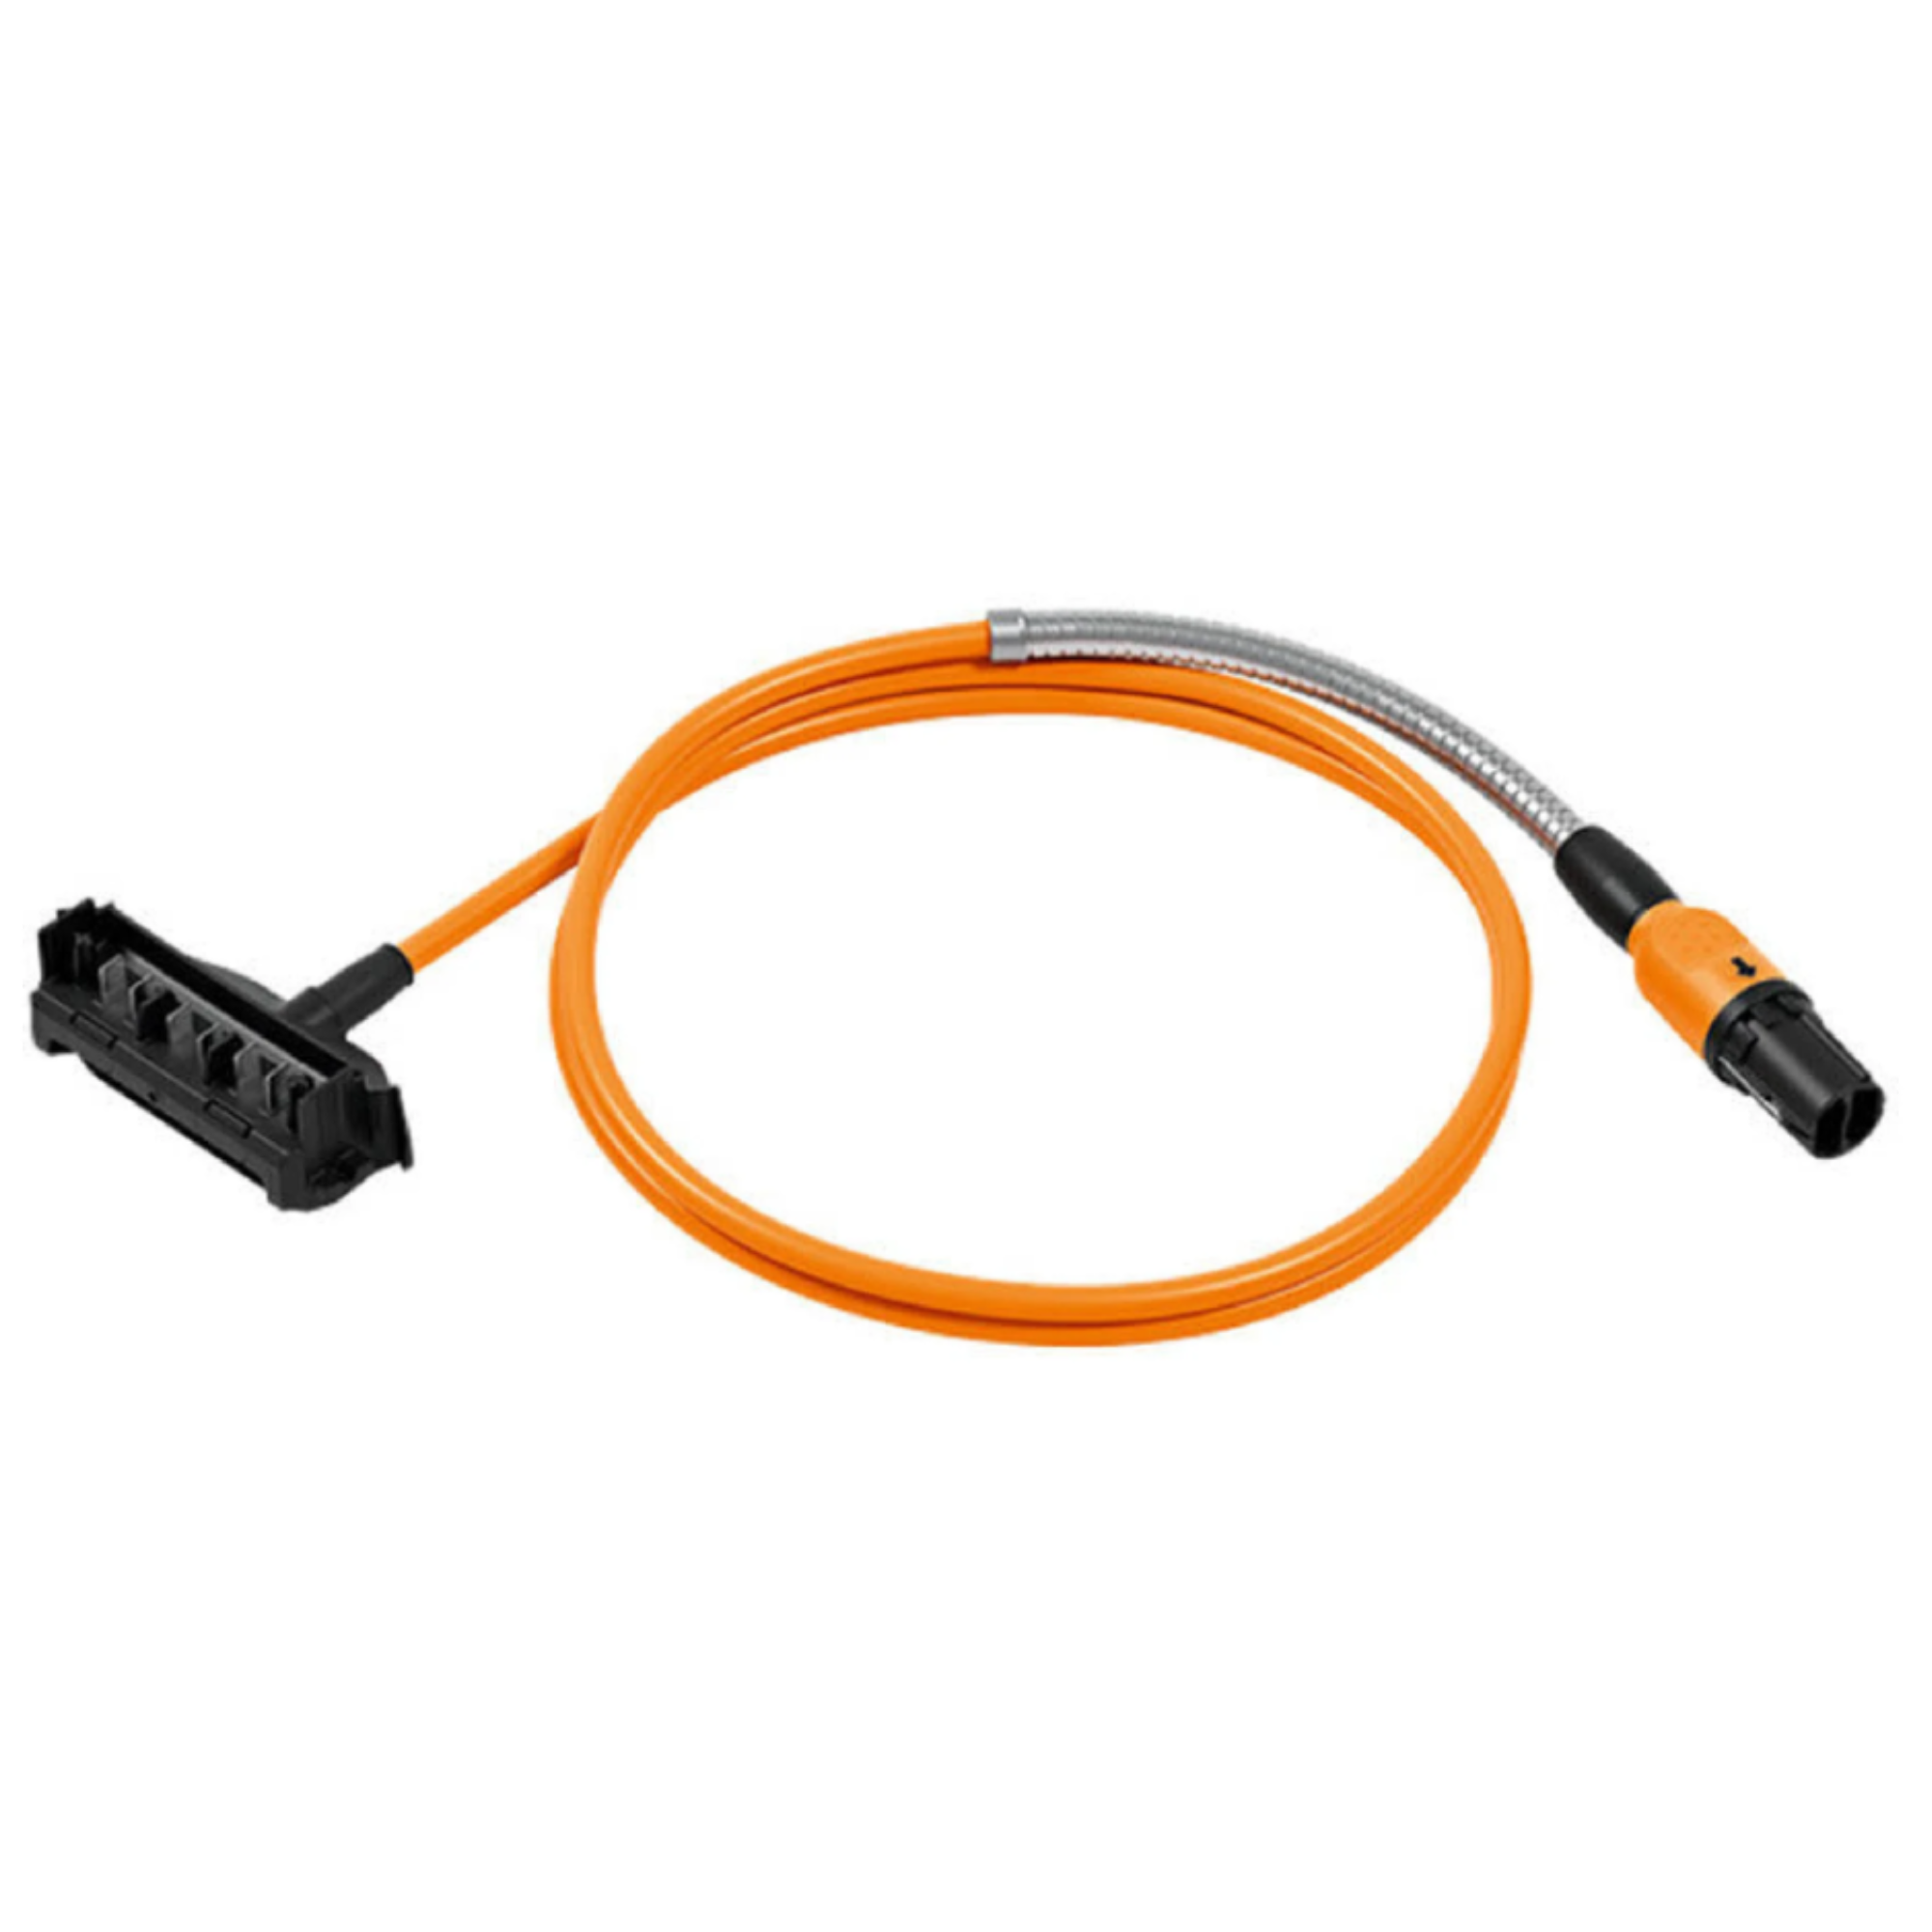 Stihl AR 2000 L & AR 3000 L Connecting Cable